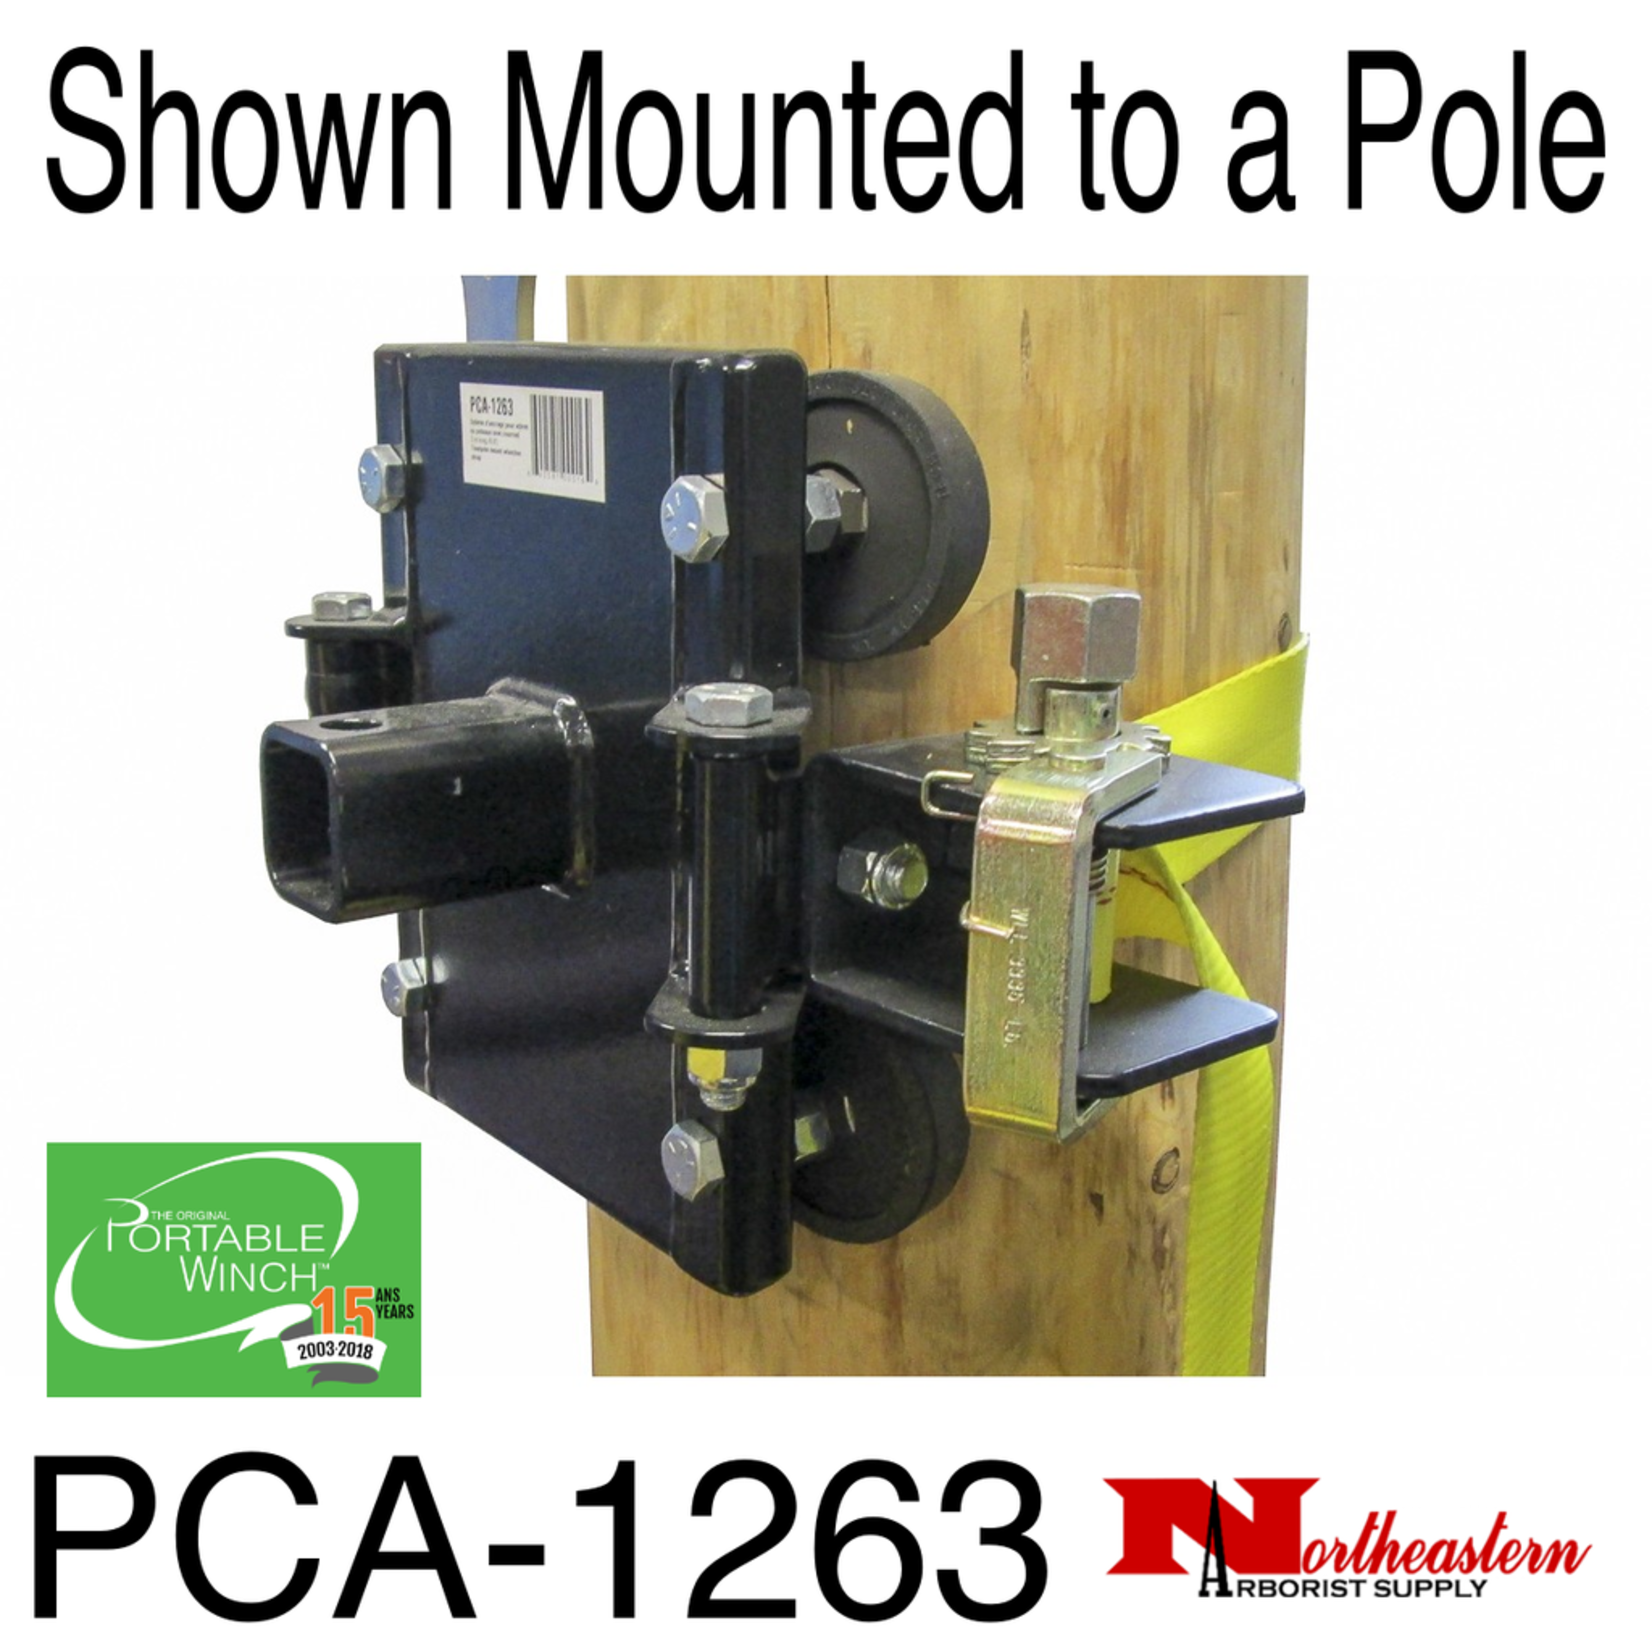 PORTABLE WINCH CO. Anchoring System for Tree or Pole with 10' Strap & Rubber Pads - Note: This system is not intended for standalone use and must be combined with other accessories.